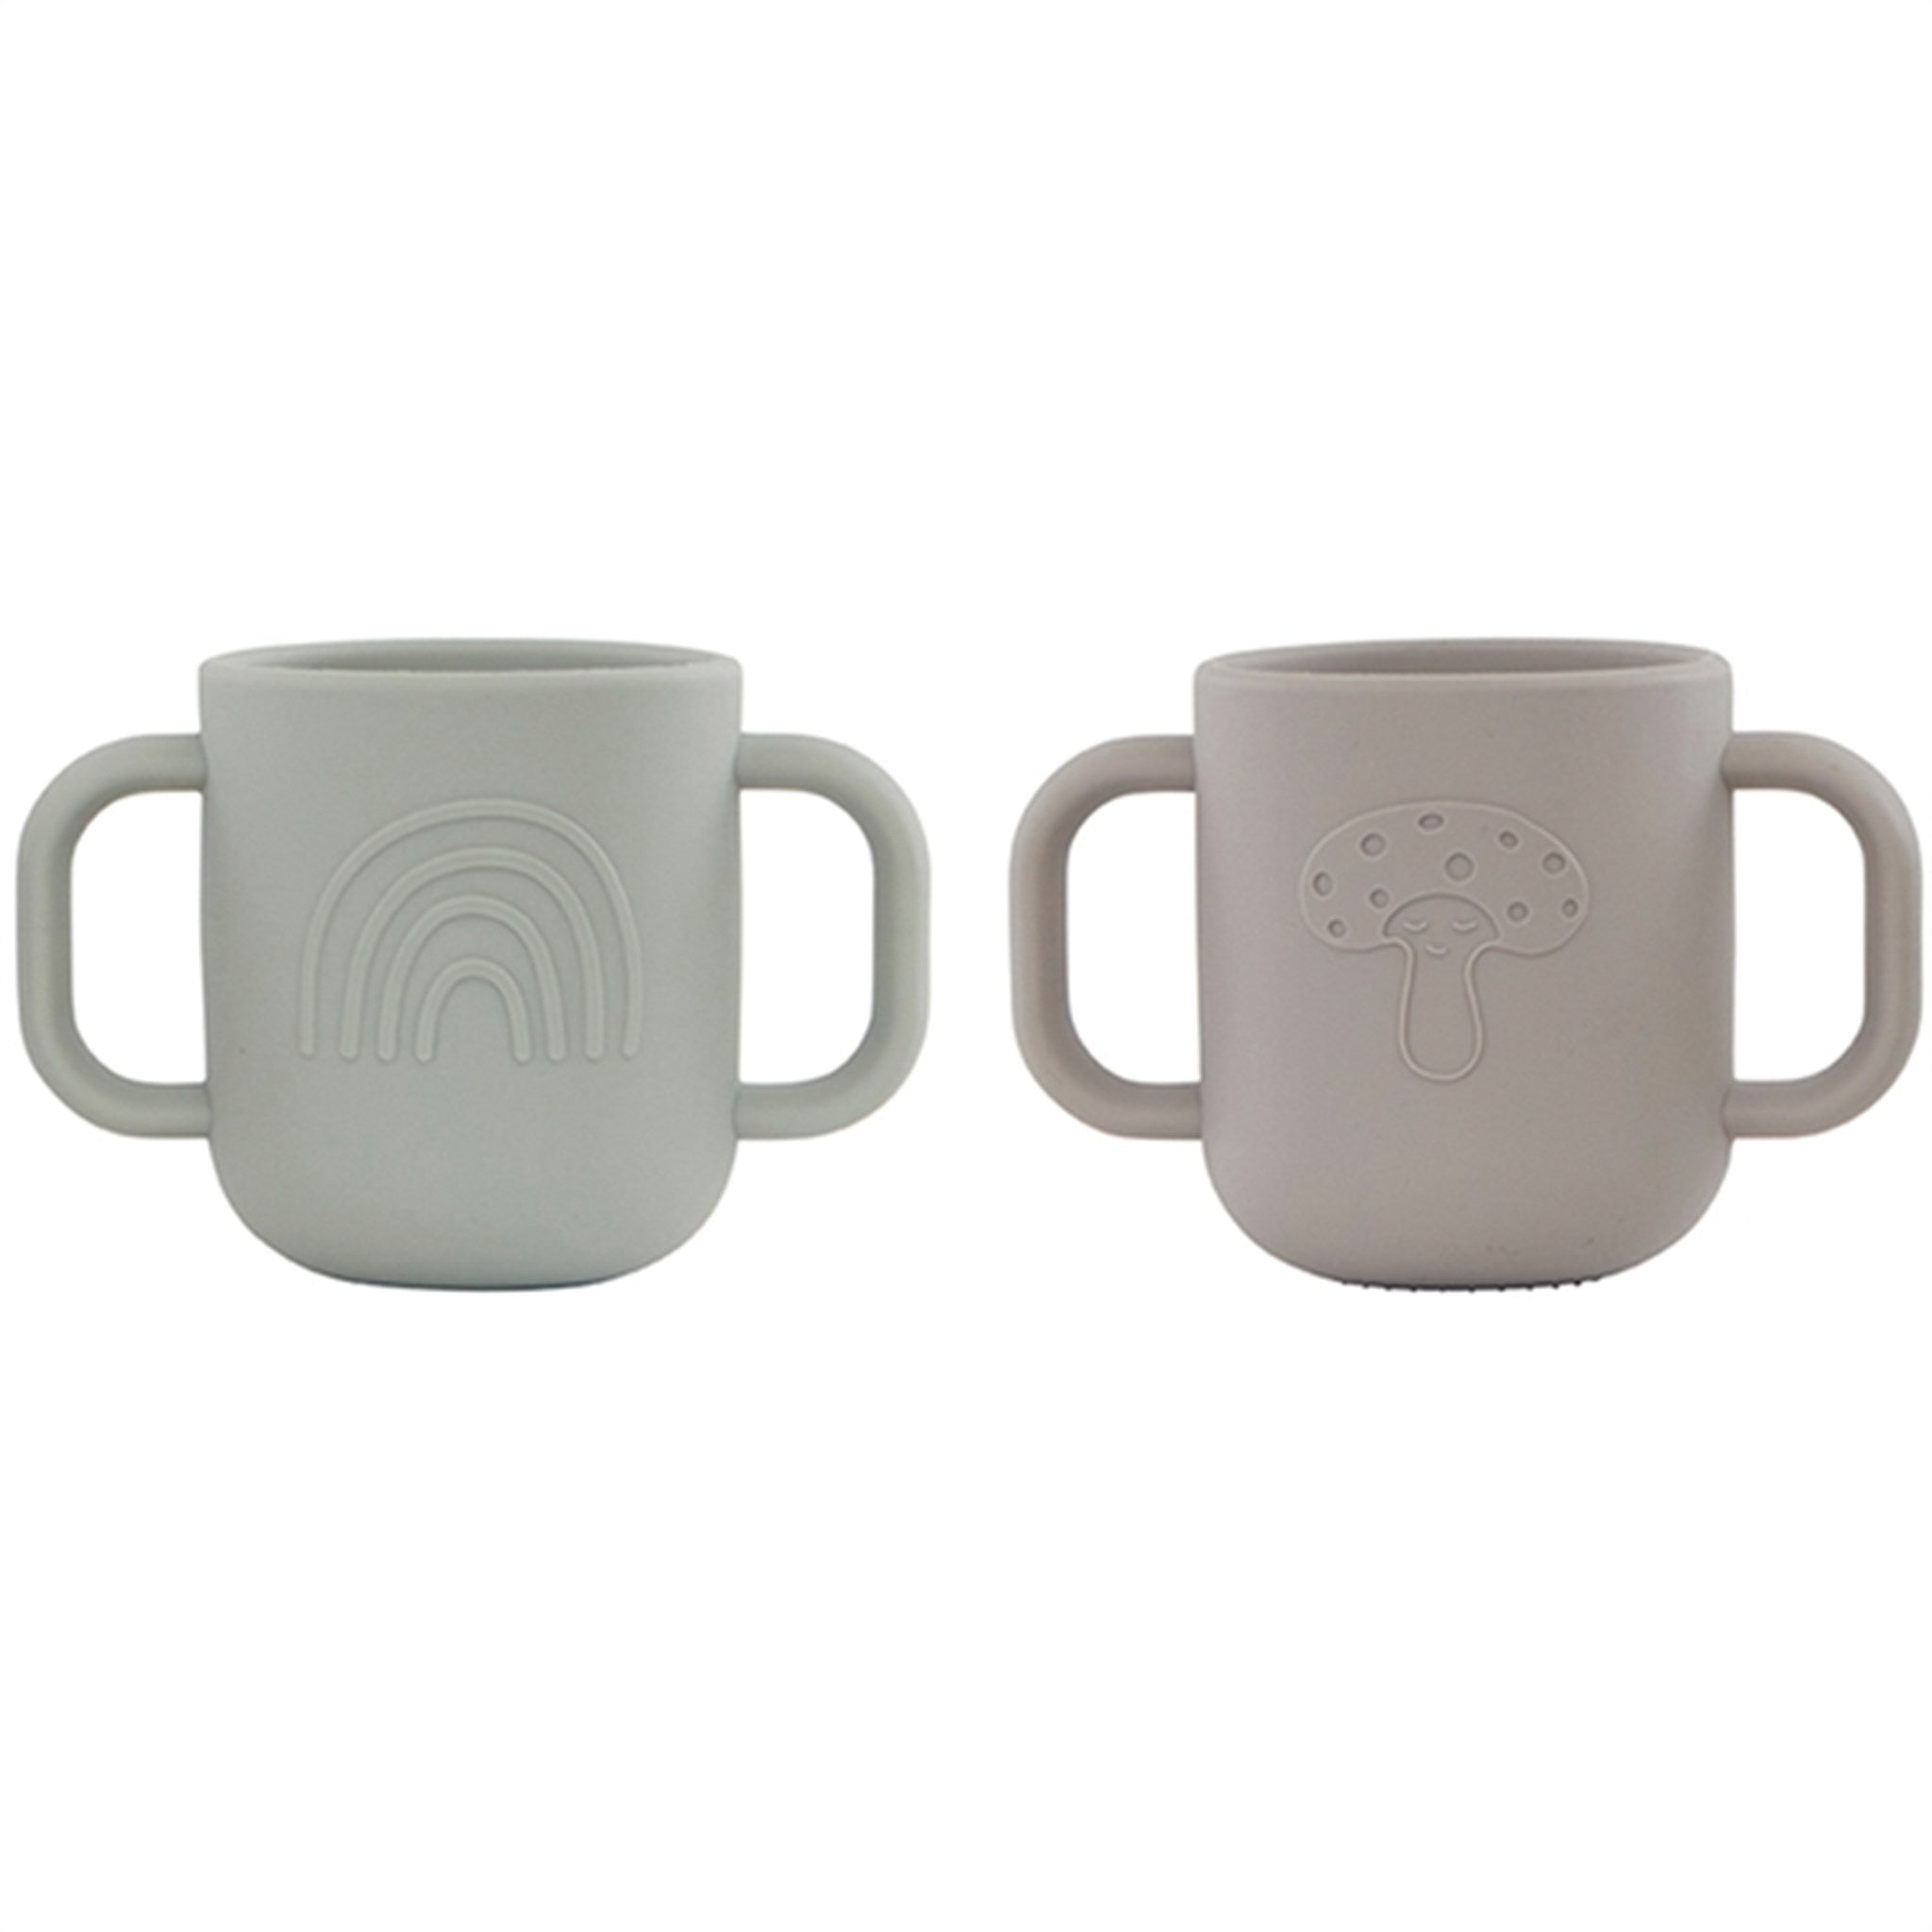 OYOY Kappu Cup 2-Pack Clay/Pale Mint